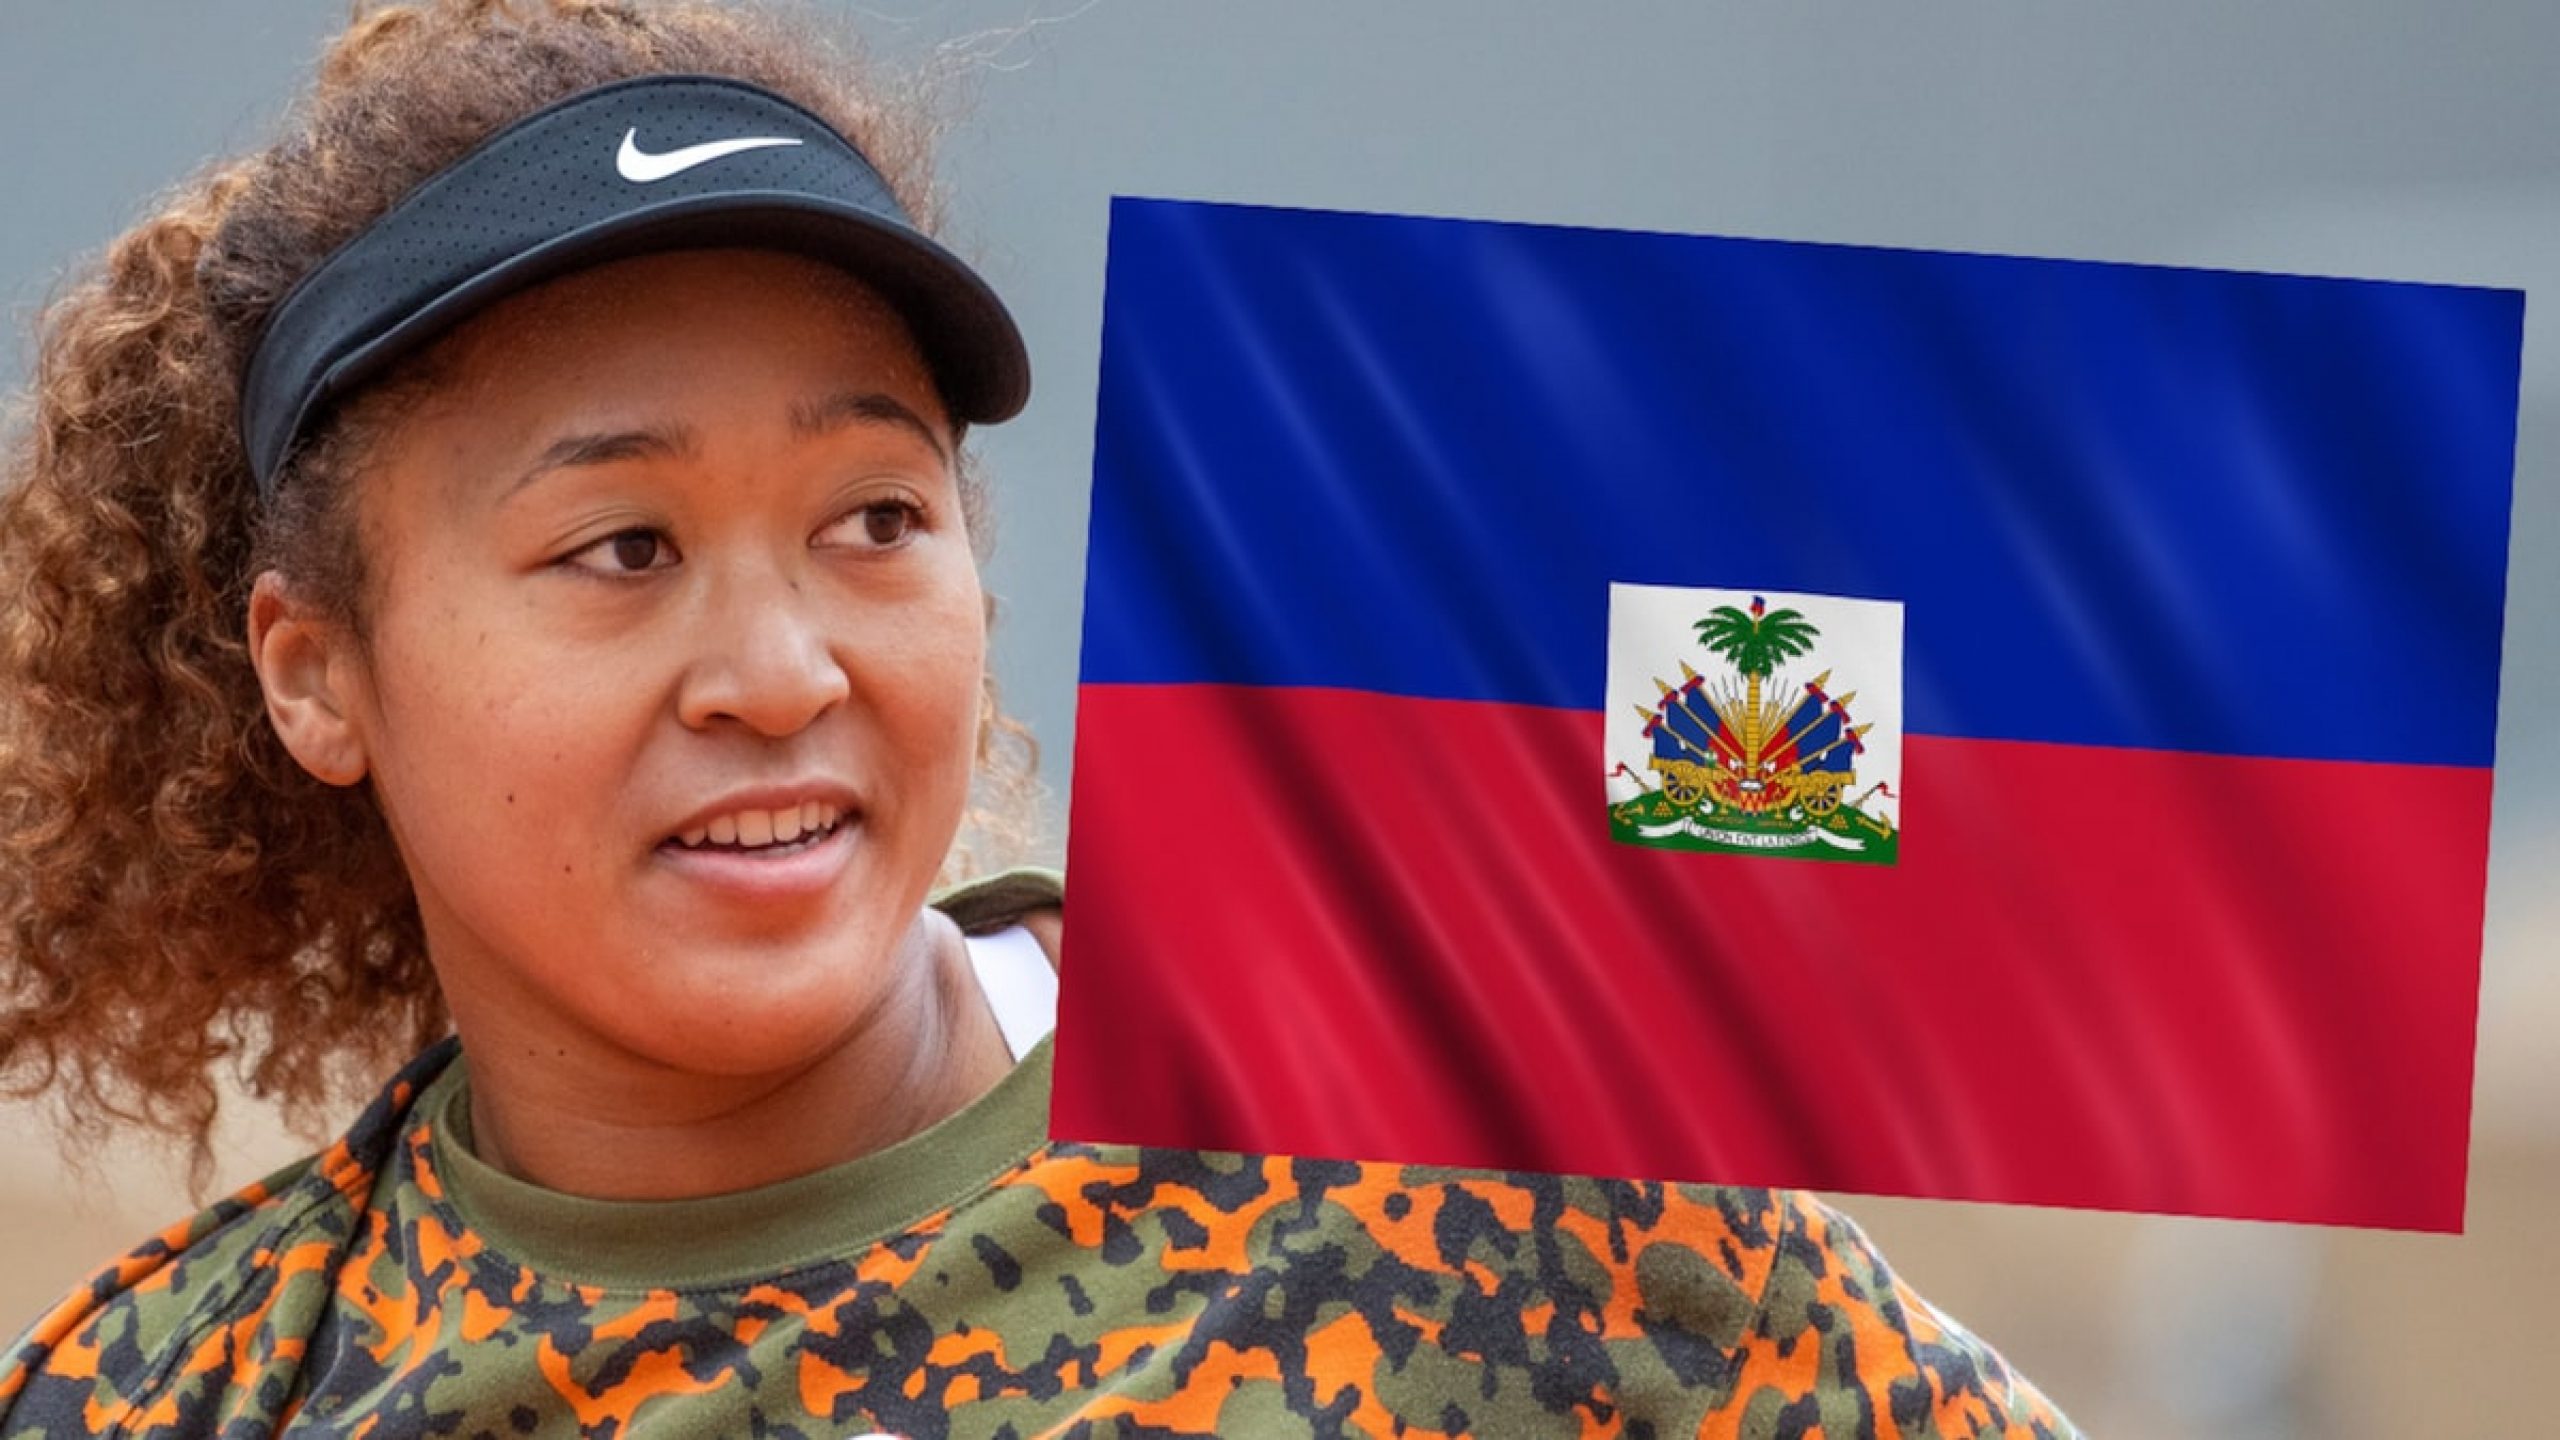 Naomi Osaka Donating Prize Money to Haiti’s Relief Effort after Earthquake